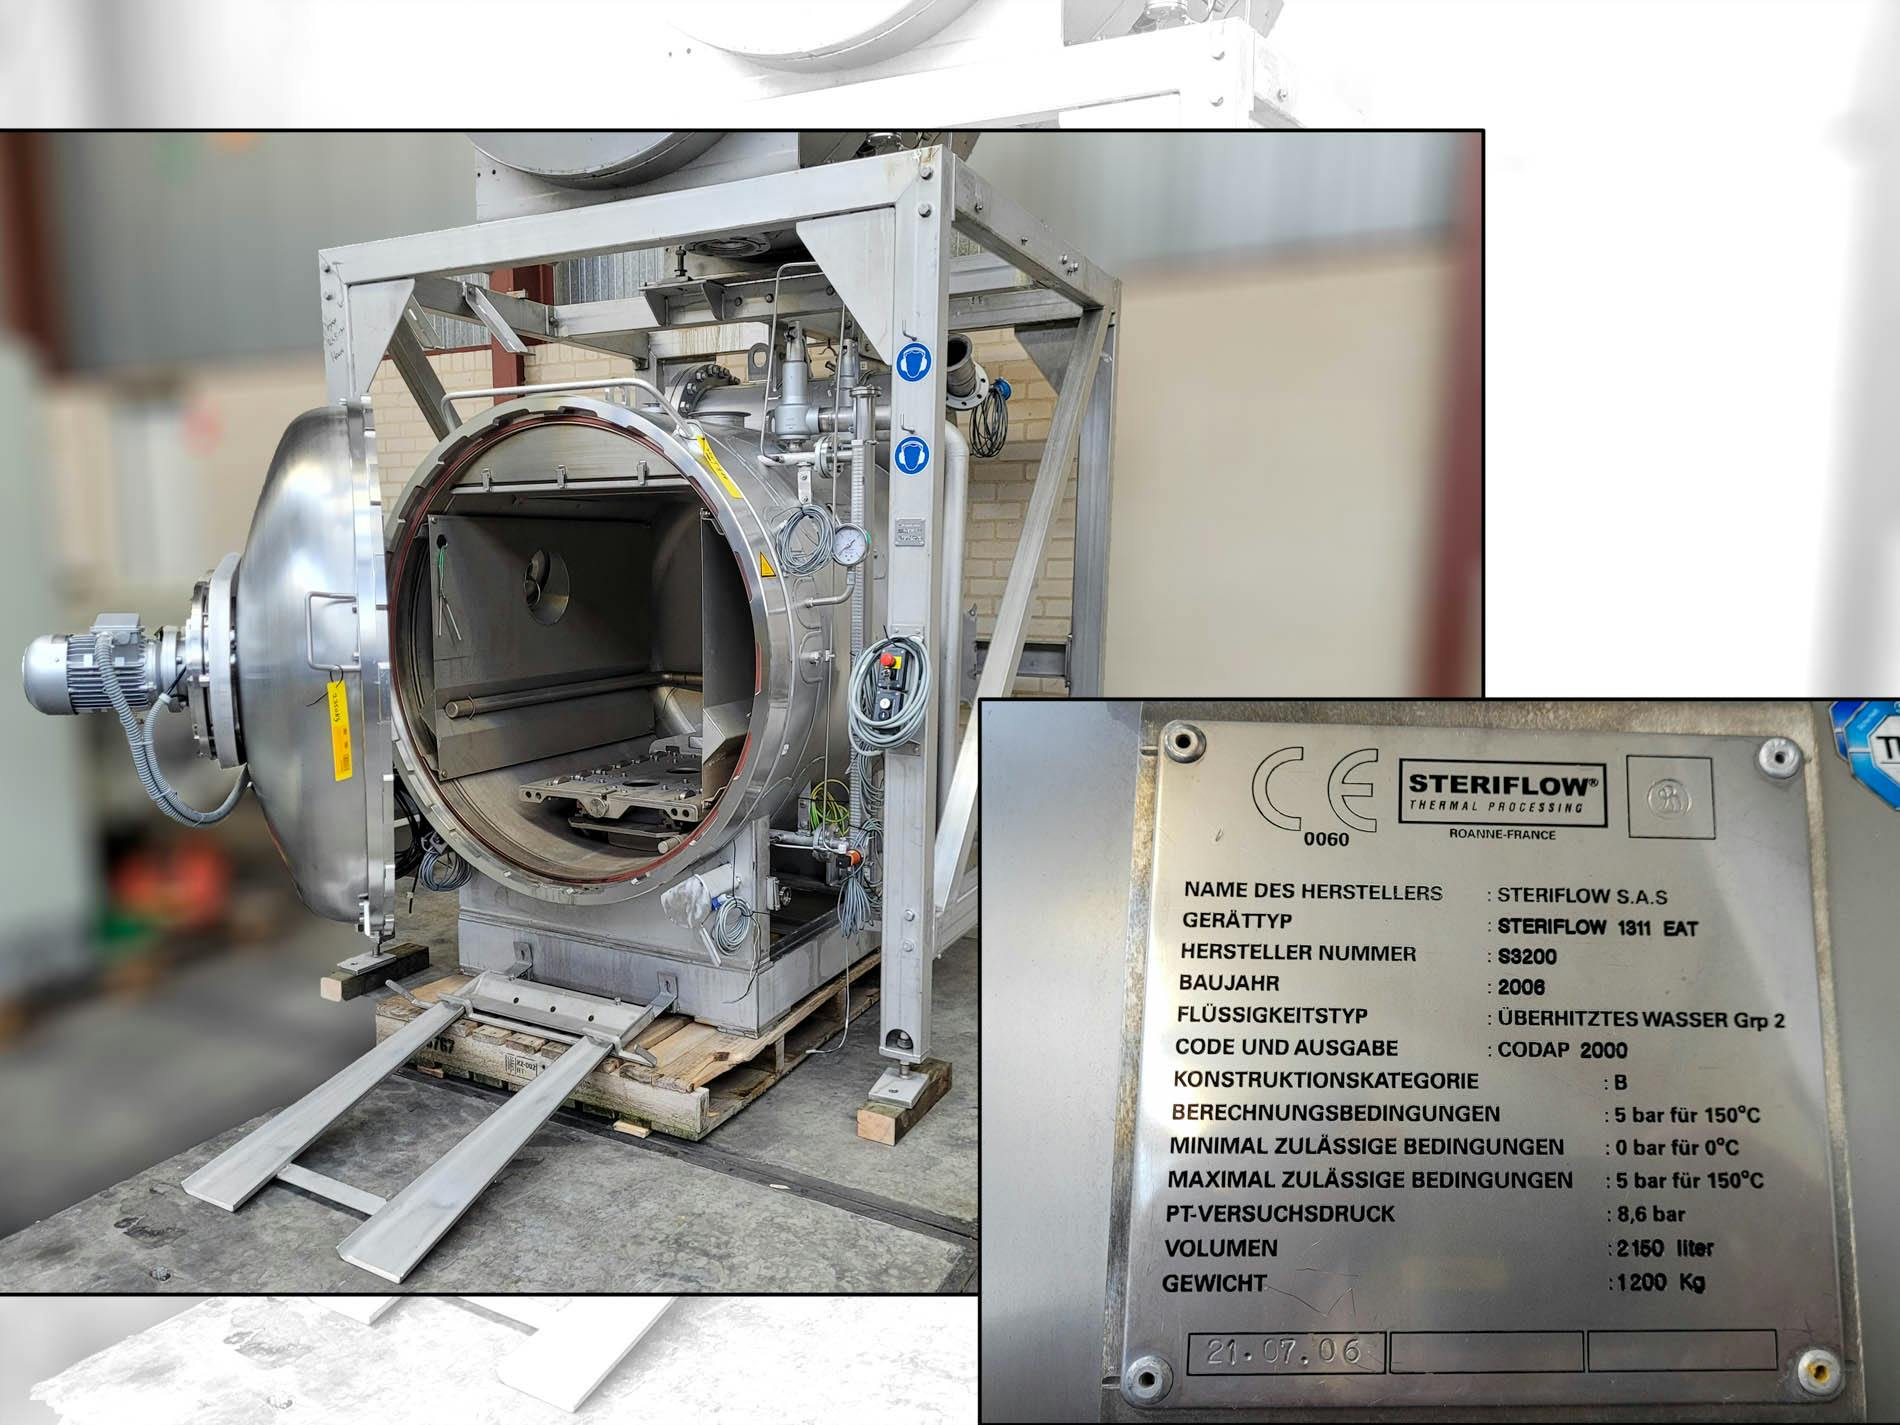 Steriflow Thermal Processing Steriflow 1311 EAT - Autoclave - image 4